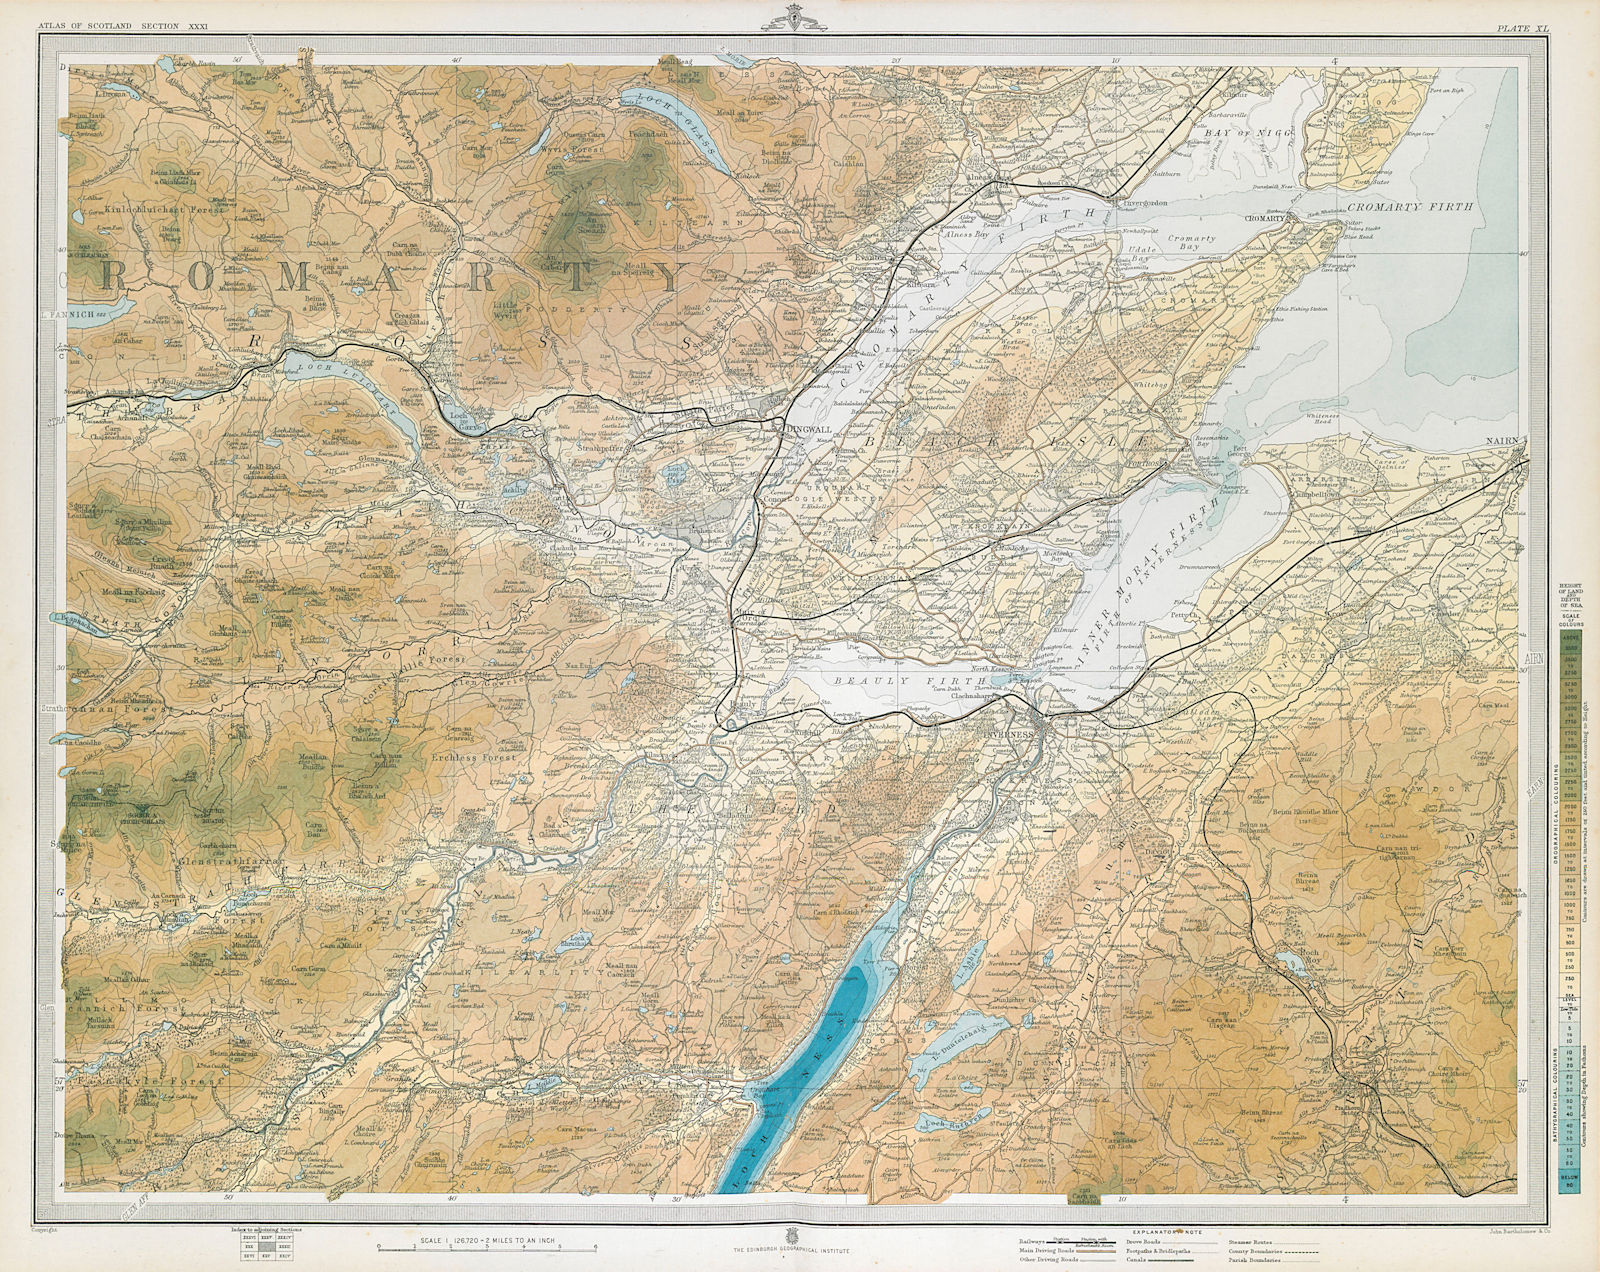 Associate Product MORAY FIRTH Dingwall Invernessshire Cromarty Firth Nairn Glen Ord LARGE 1895 map